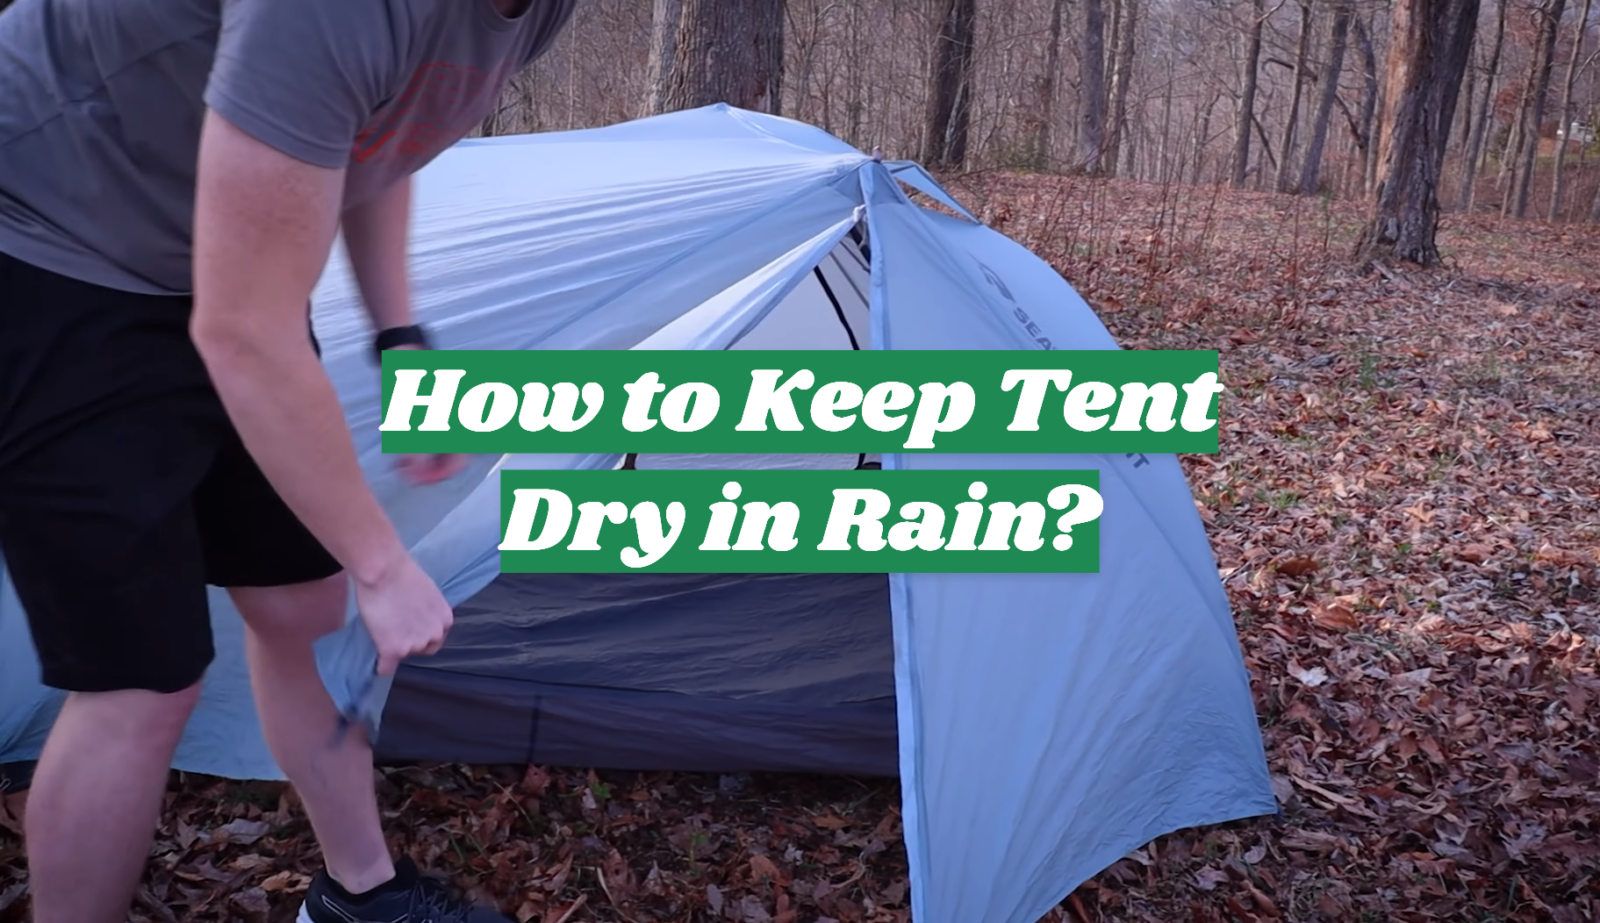 How to Keep Tent Dry in Rain?